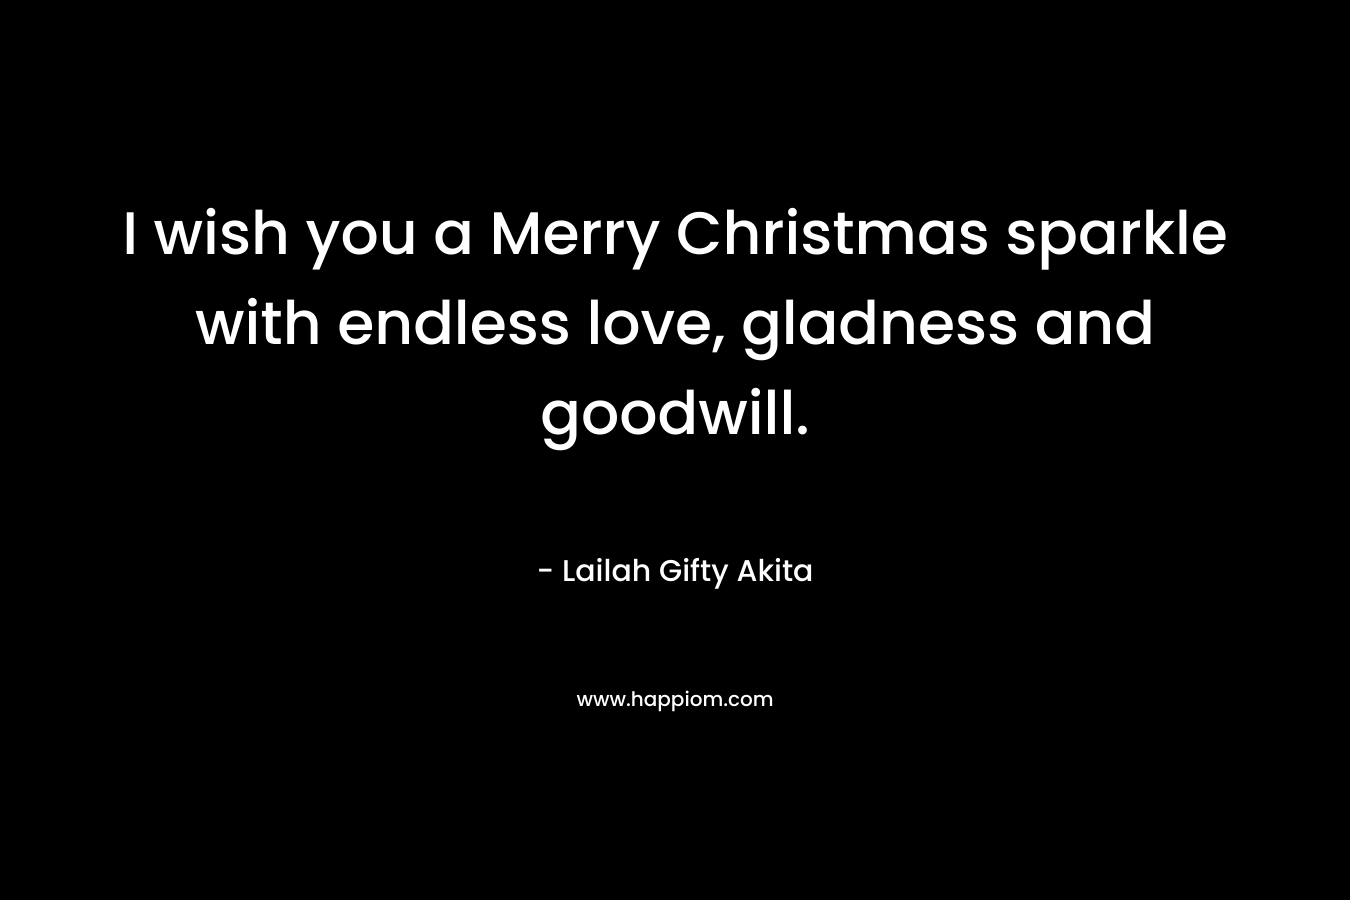 I wish you a Merry Christmas sparkle with endless love, gladness and goodwill.